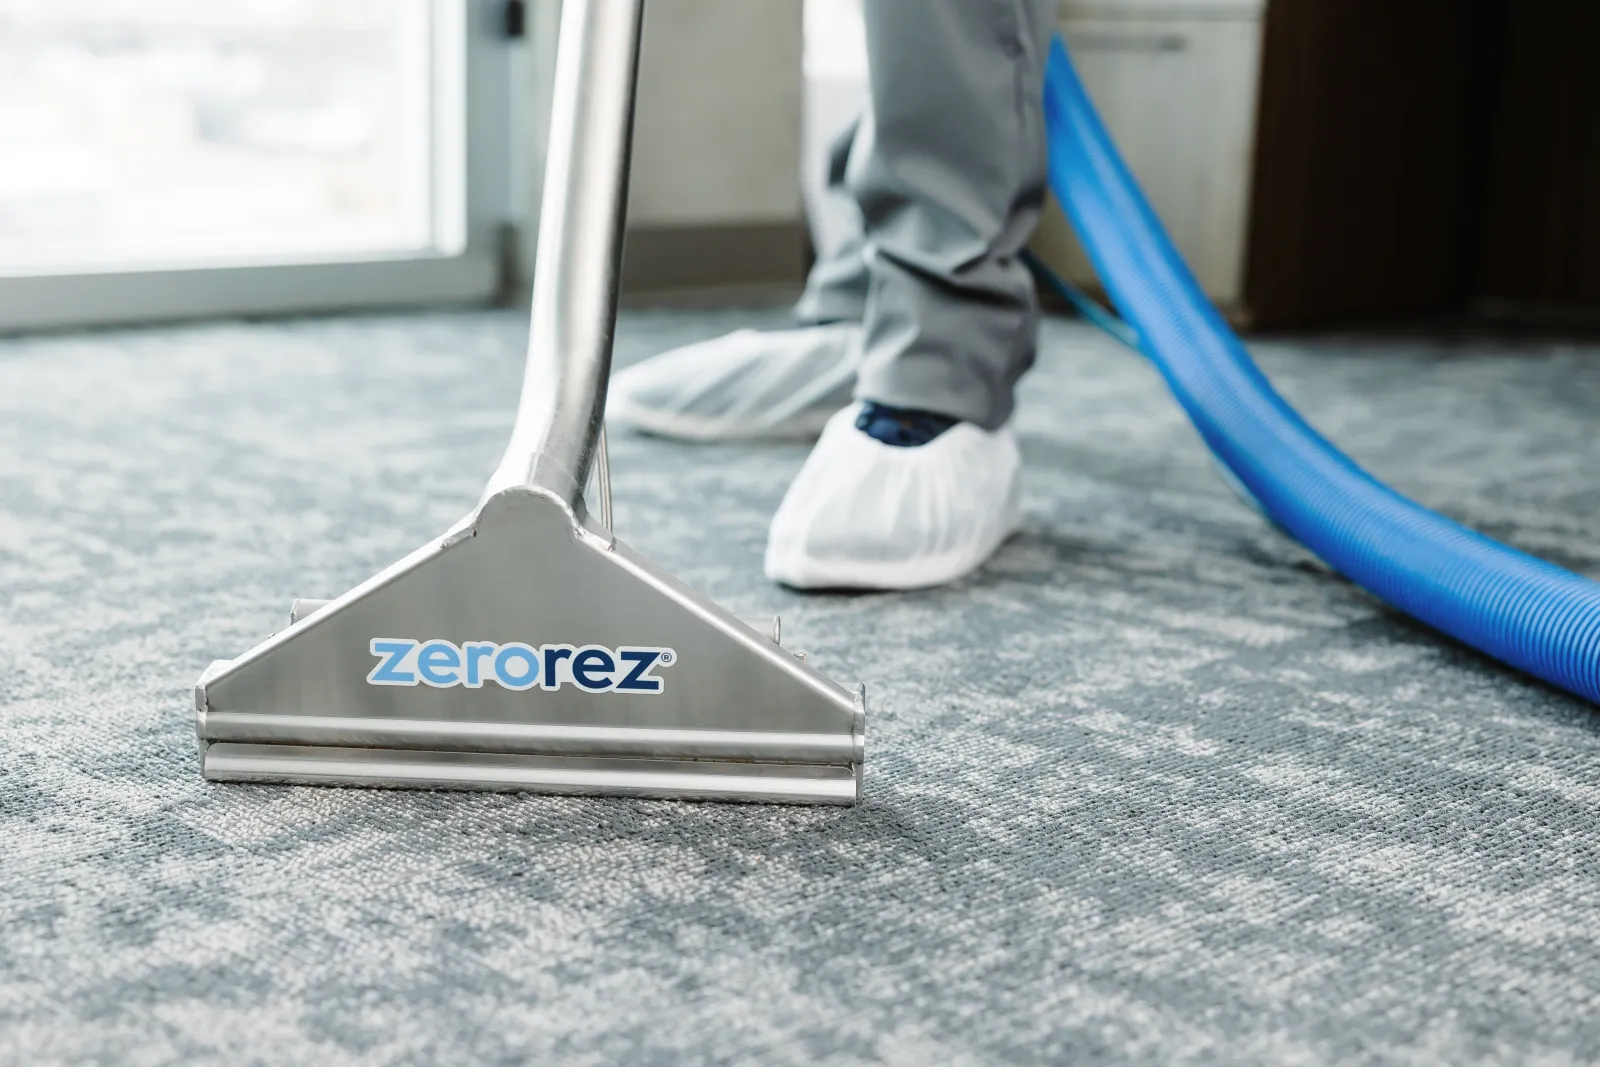 Zerorez Zr Wand steam cleaning extraction wand to clean olefin carpets and rugs